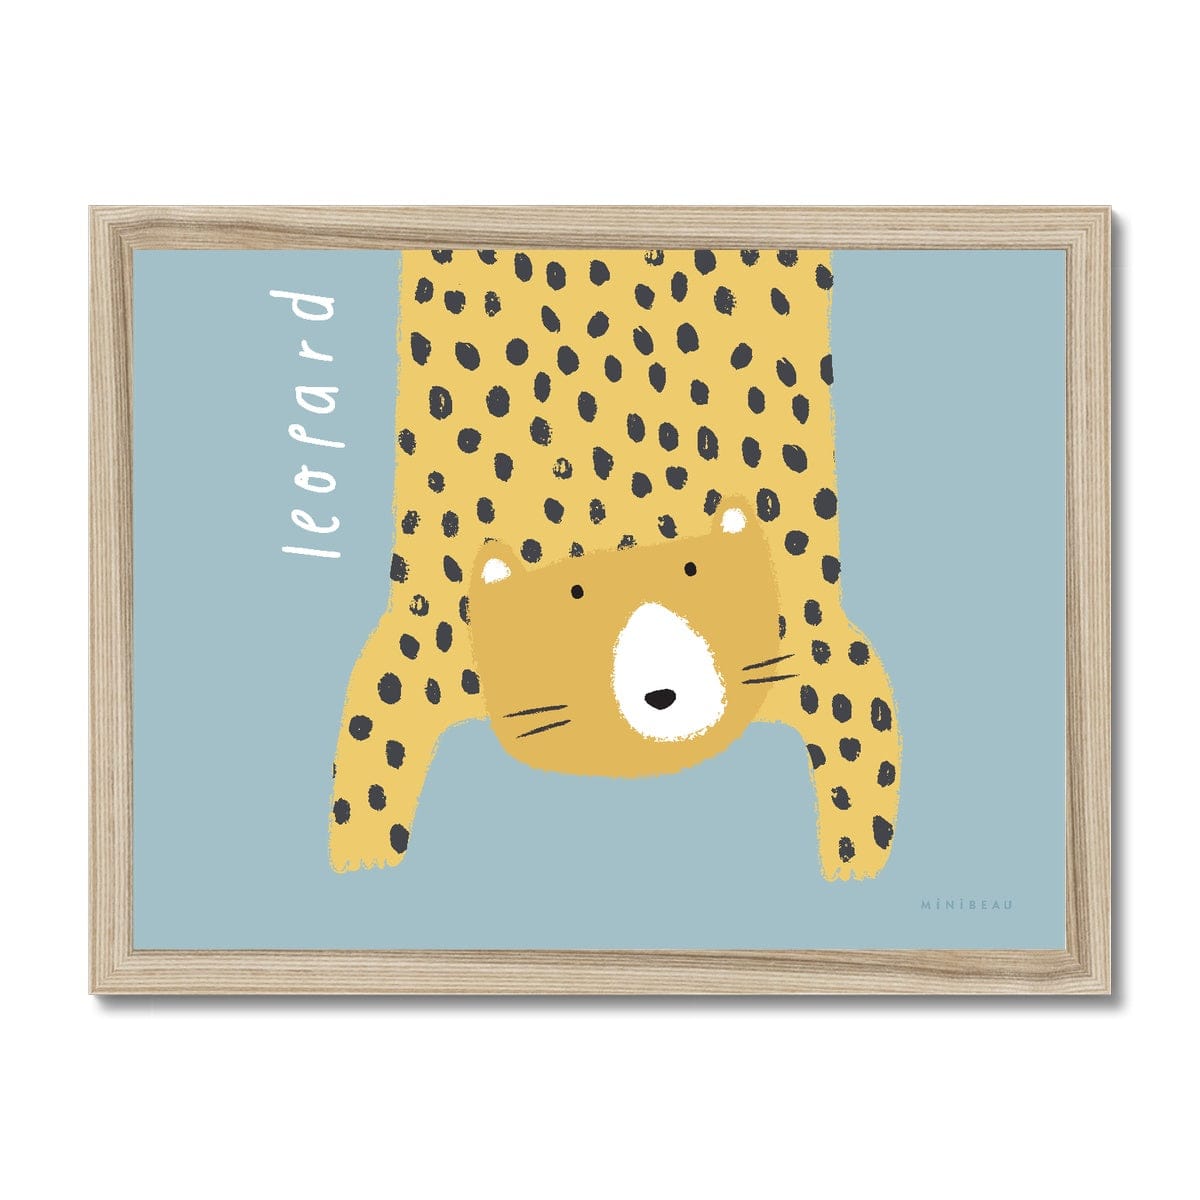 Our Leopard art print shows a hand-drawn leopard hanging down in to the picture, lifting it's head to look out at us on a light blue background, with the word leopard written alongside it, in a natural wooden frame.